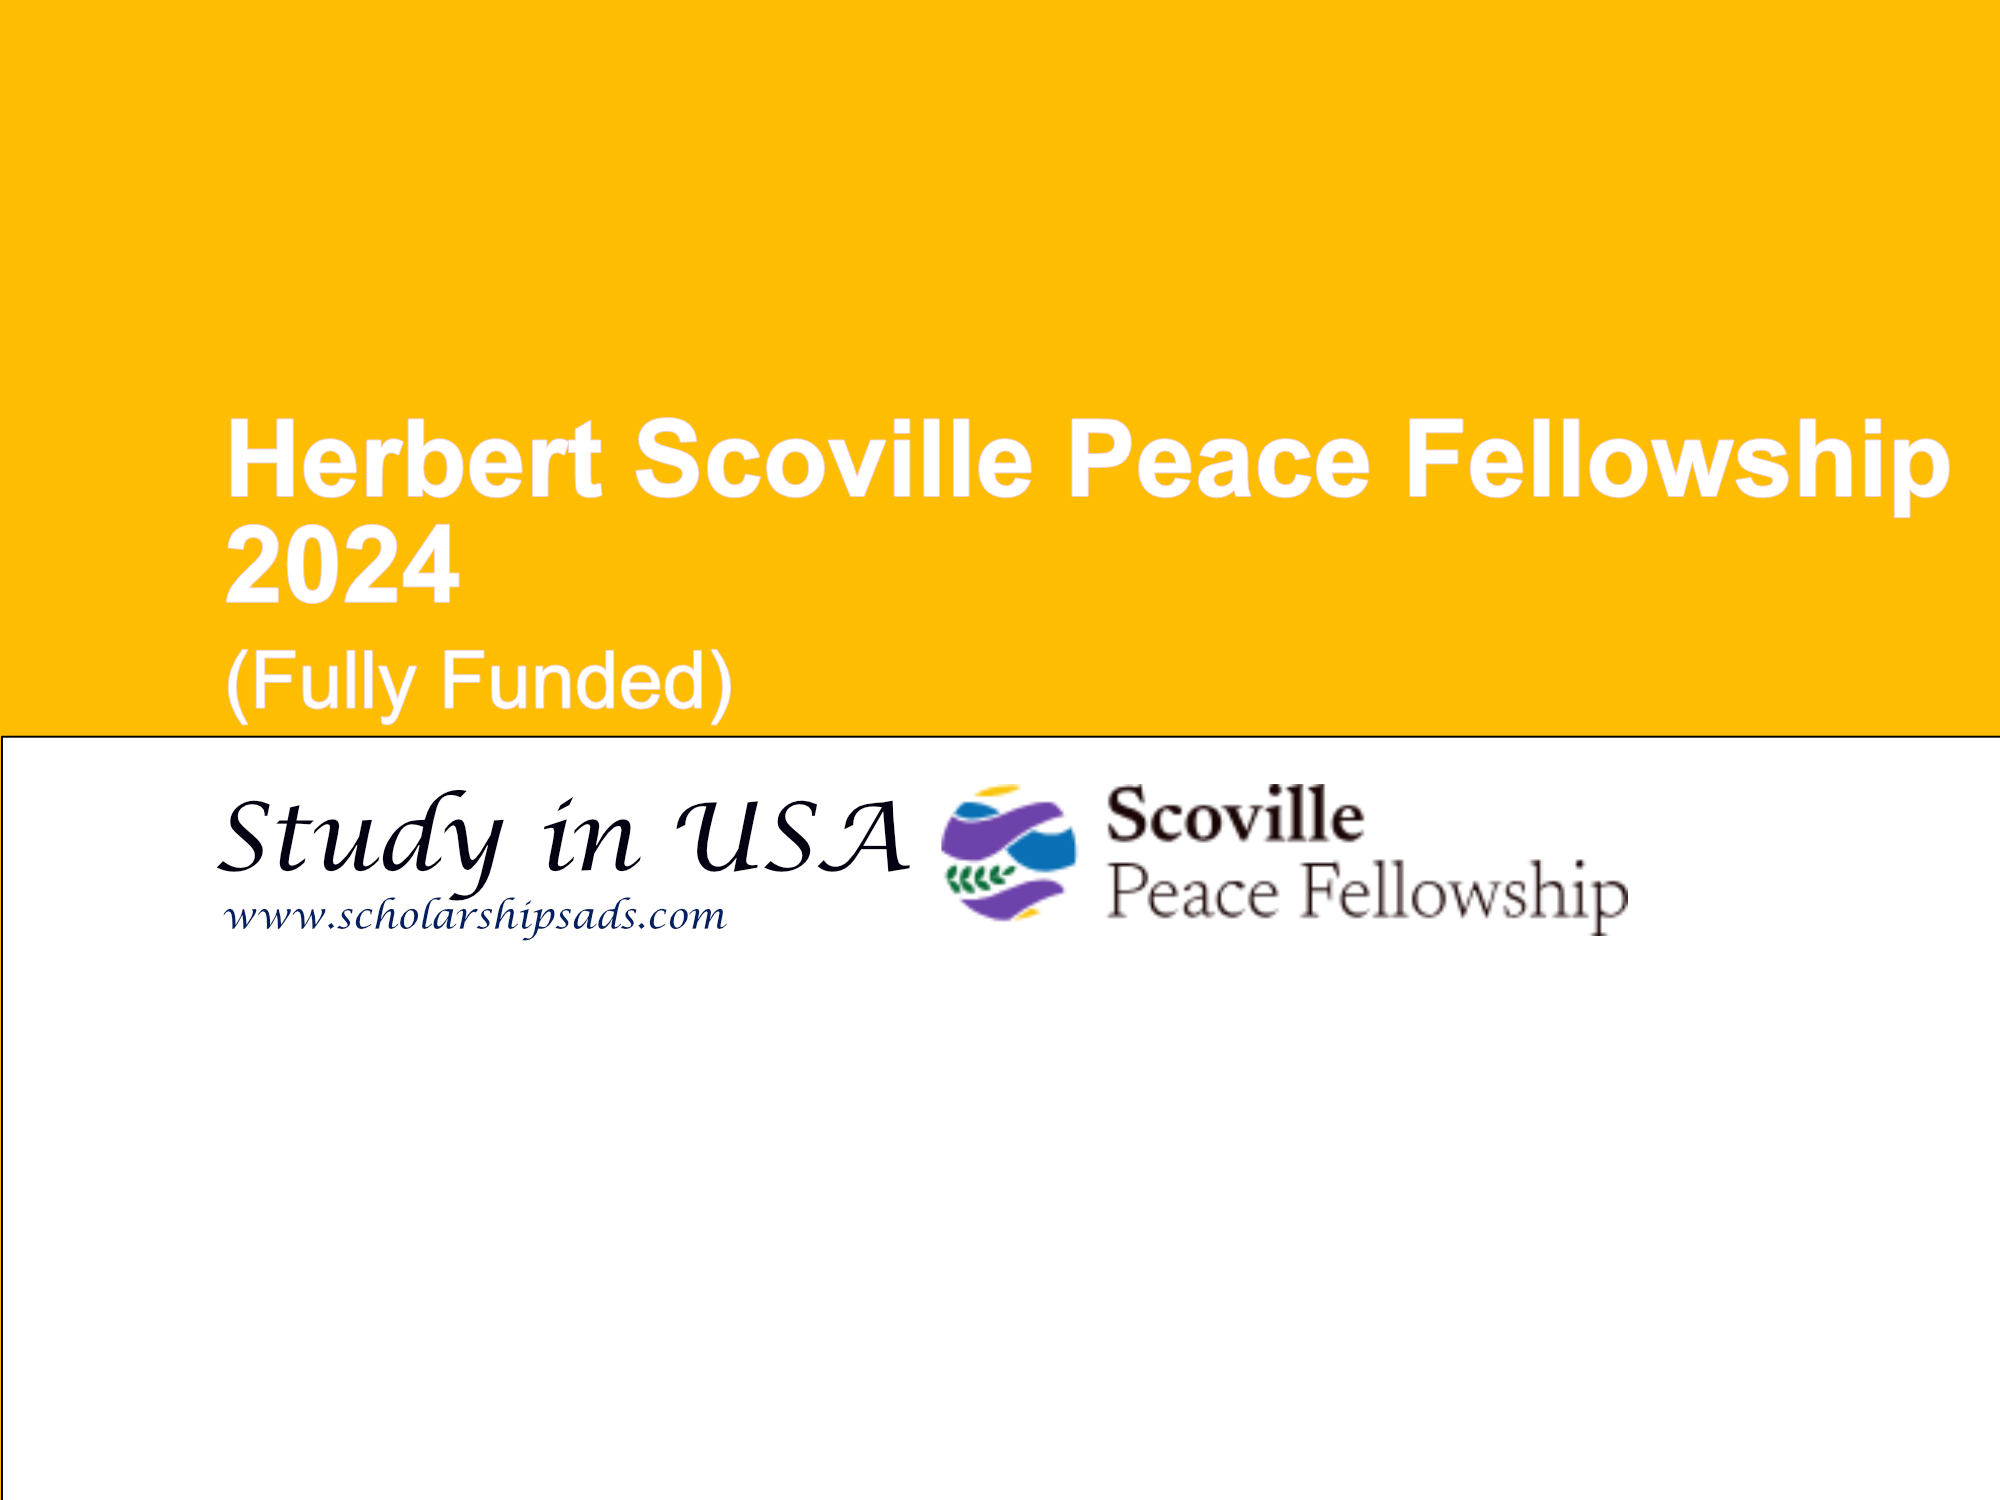 Herbert Scoville Peace Fellowship 2024, USA. (Fully Funded)